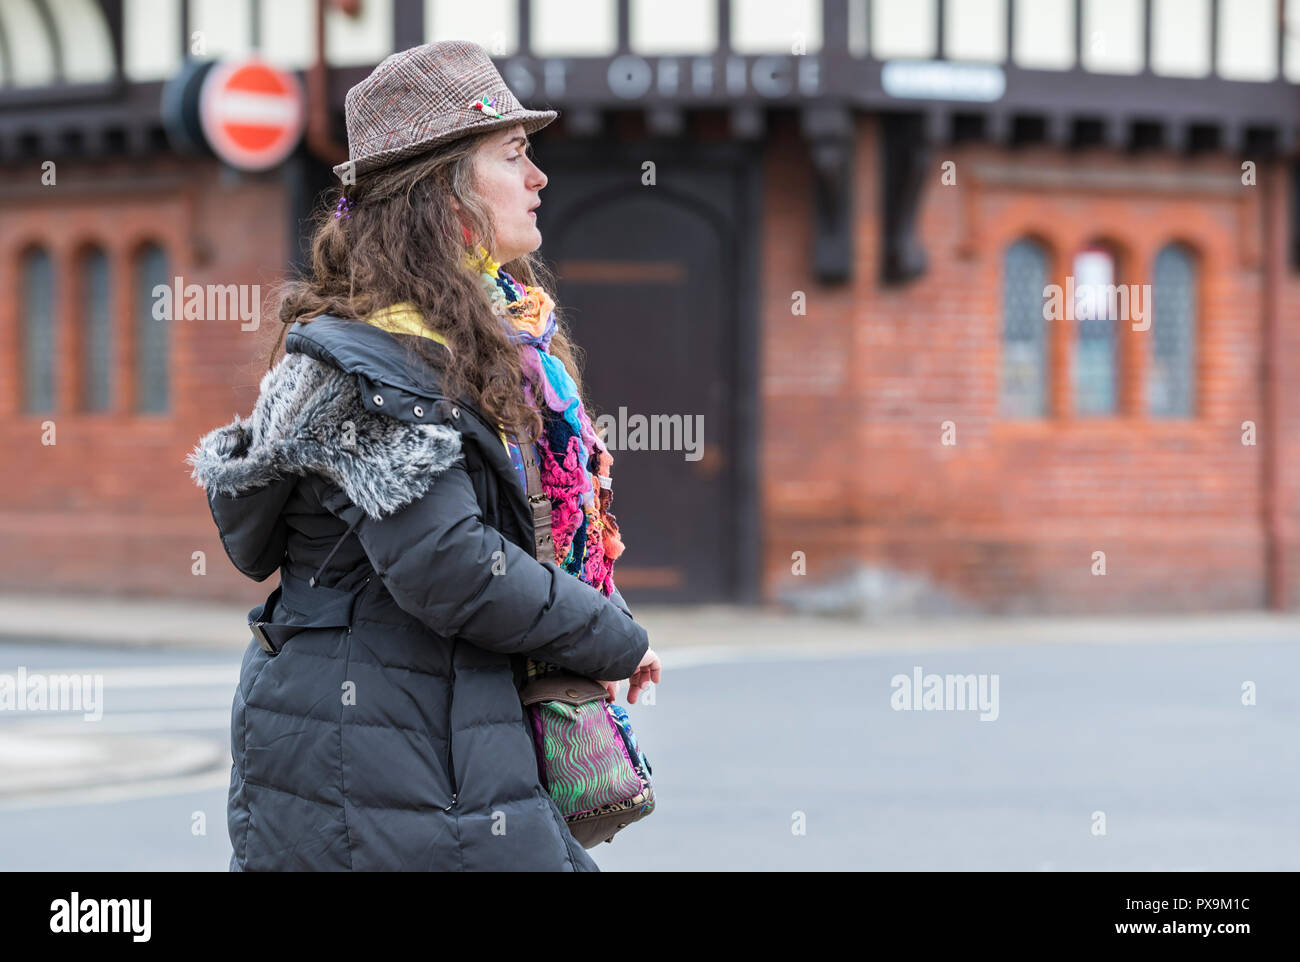 Side view of a middle aged woman walking wearing warm colourful clothes and a winter coat and hat. Lady wearing colorful clothing. Stock Photo